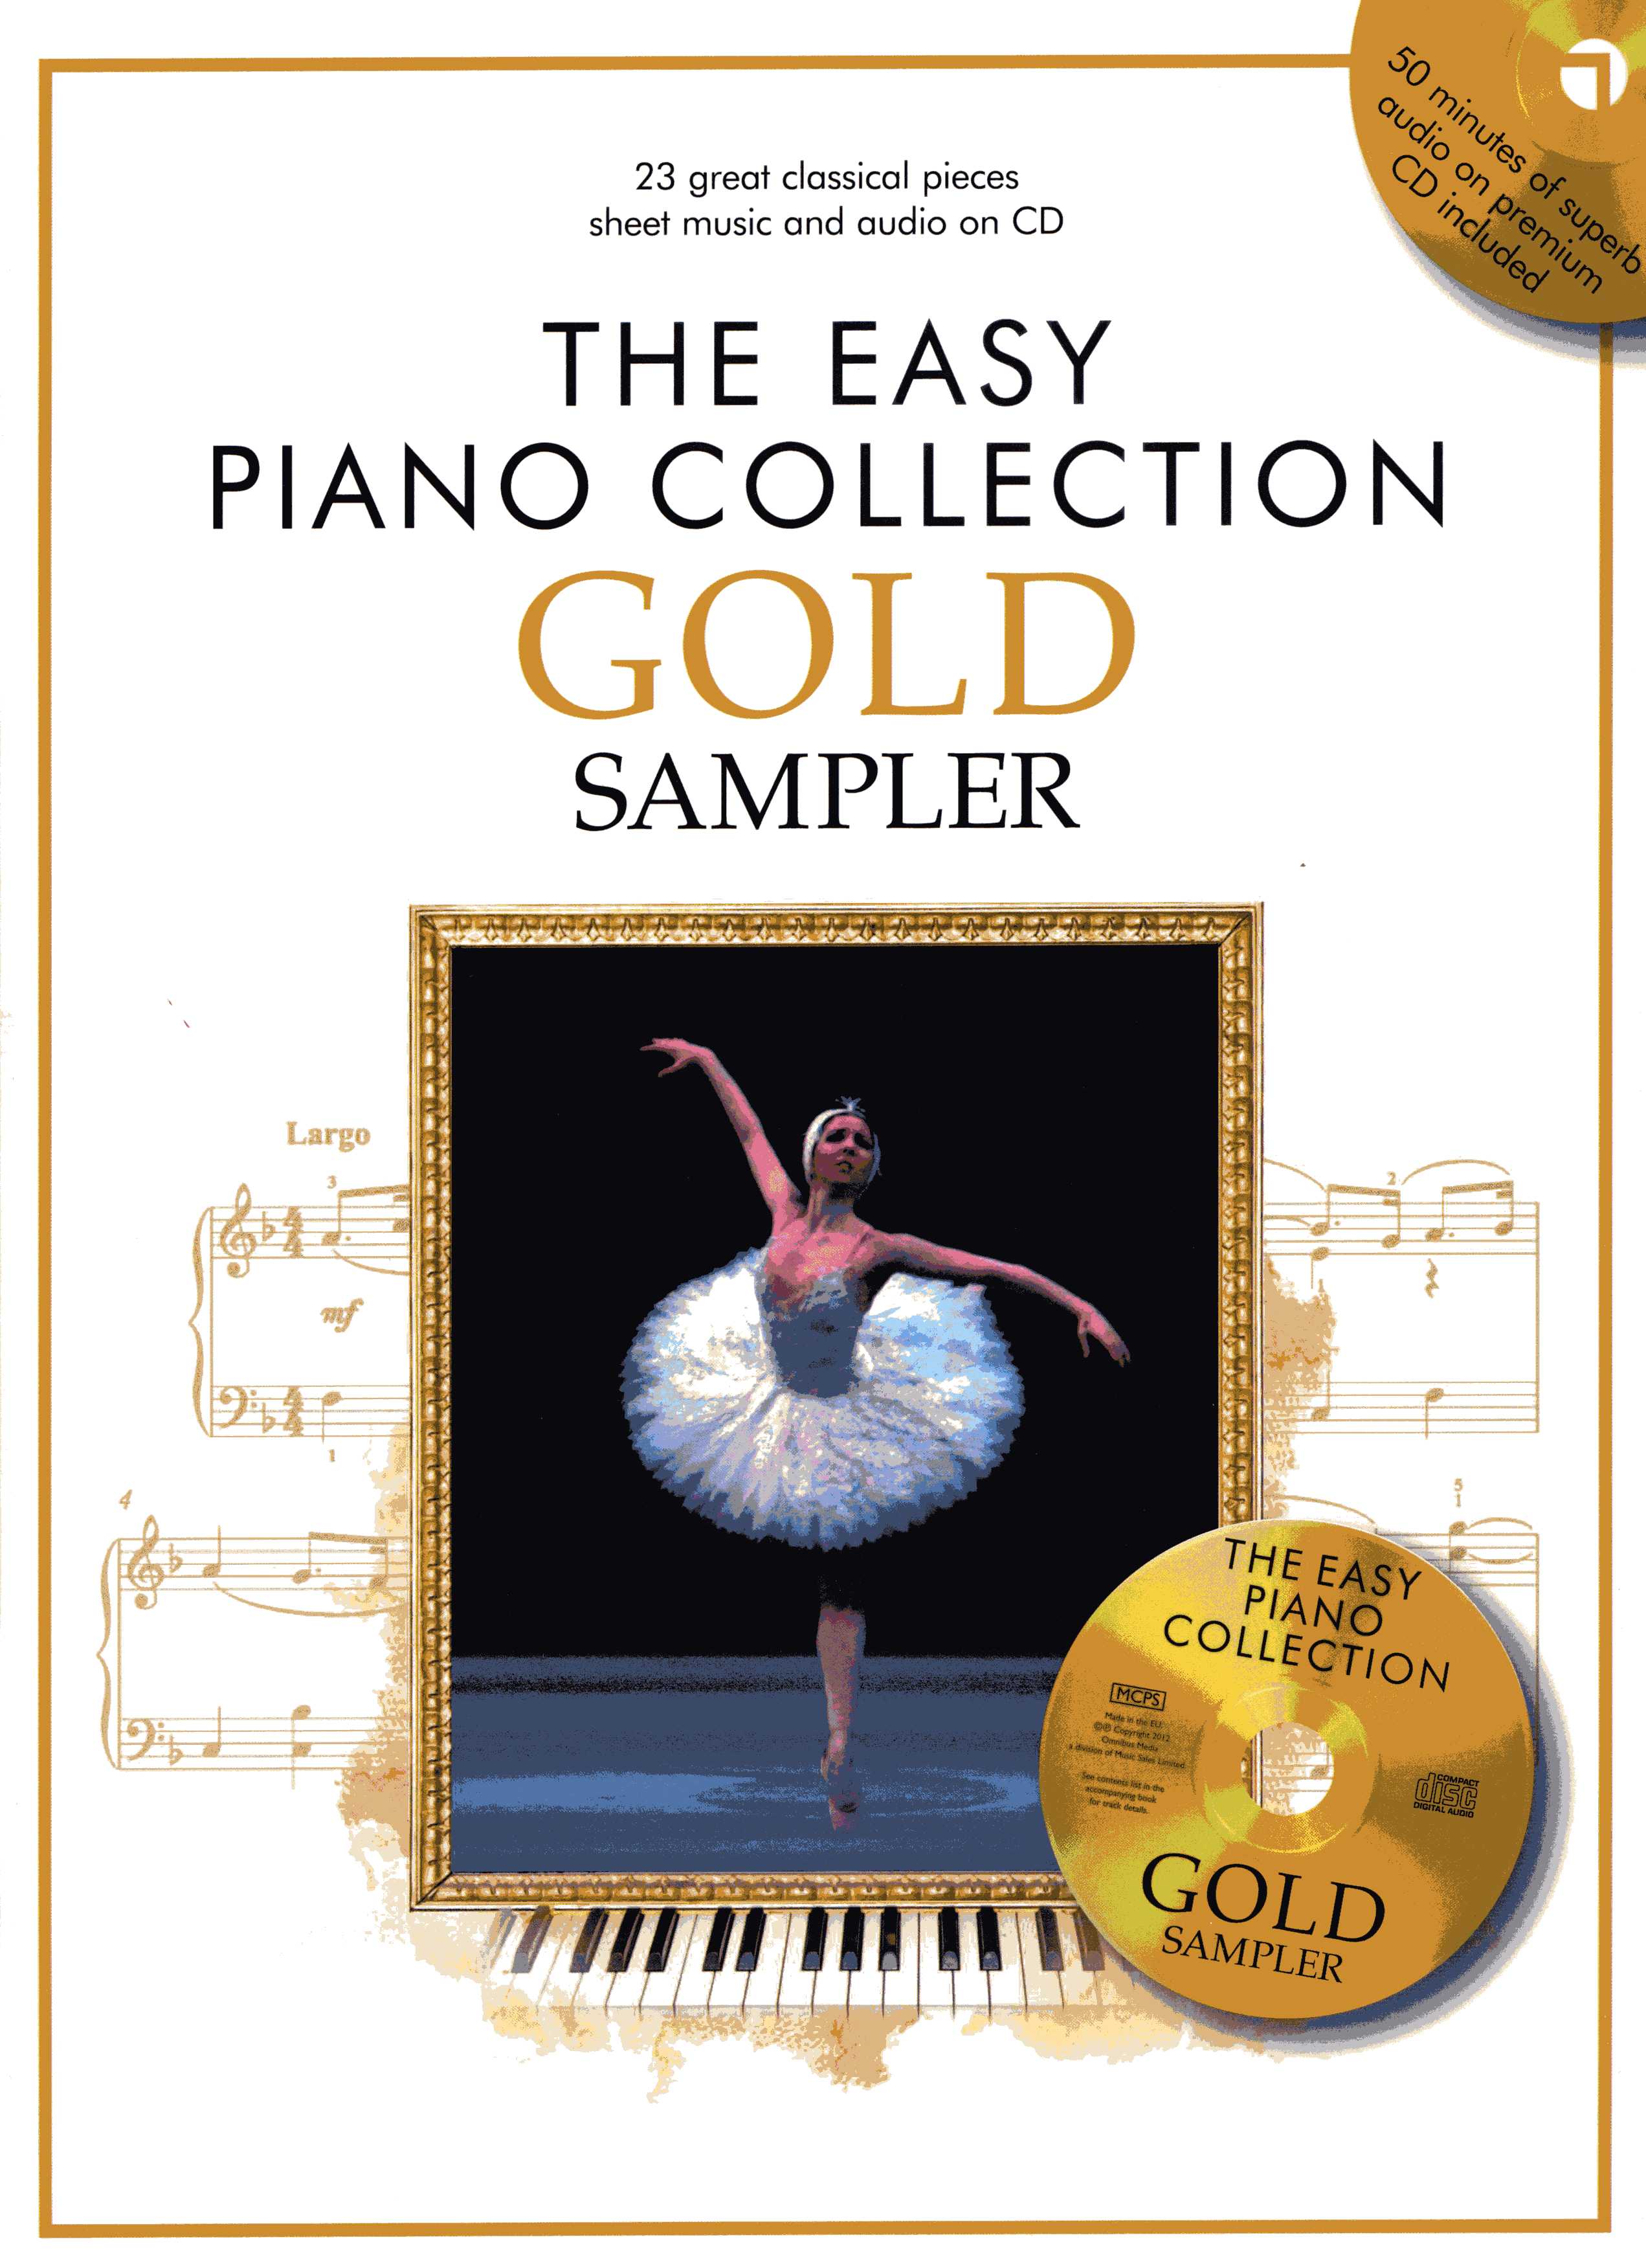 The Easy Piano Collection Gold Sampler